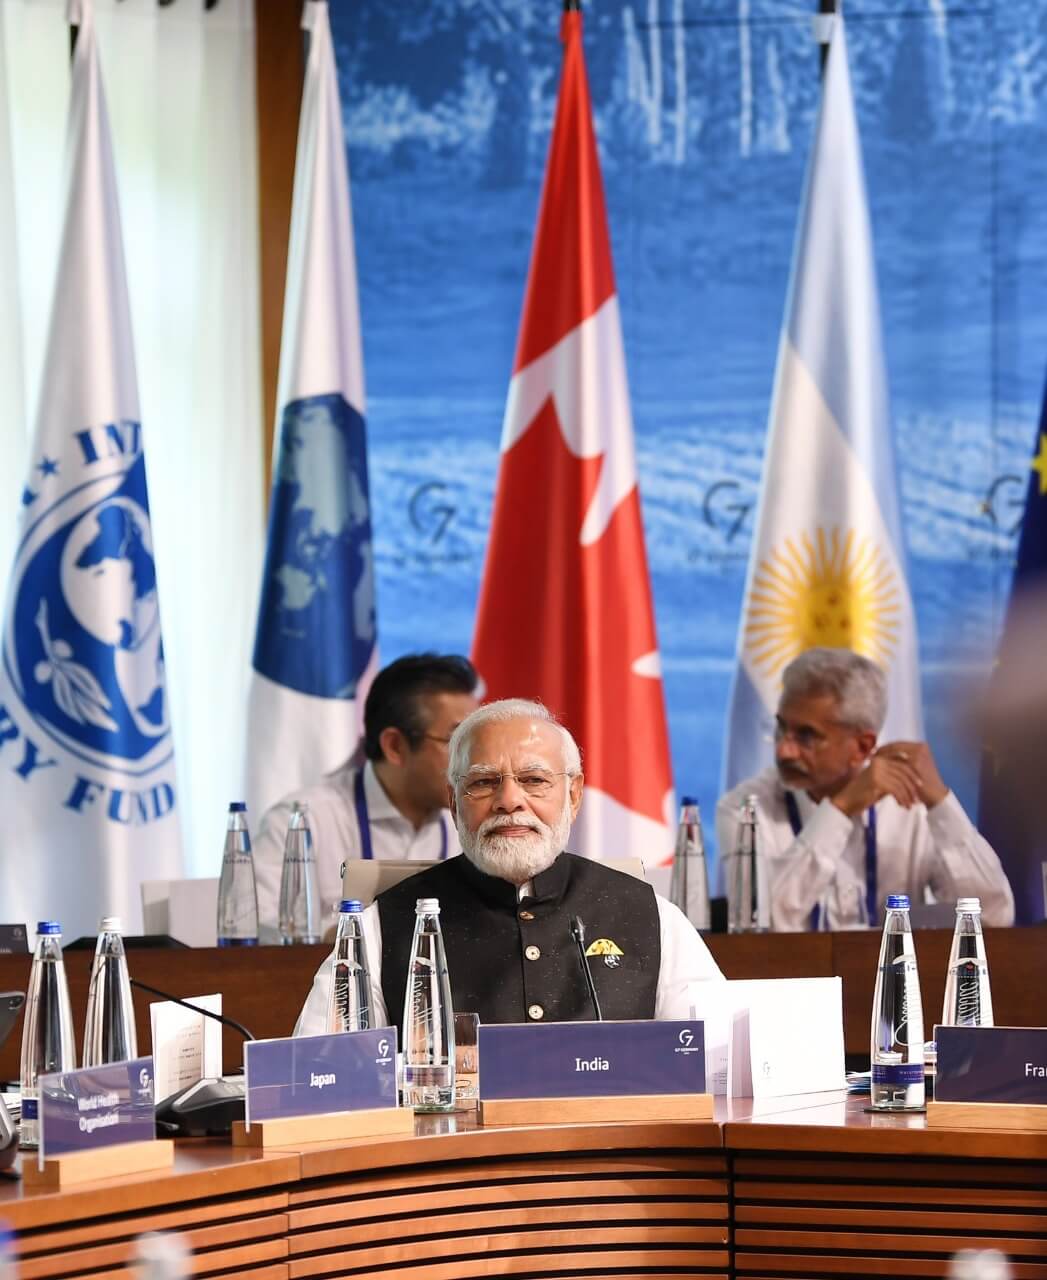 SUMMARY: PM Modi’s Meetings With G7 Counterparts